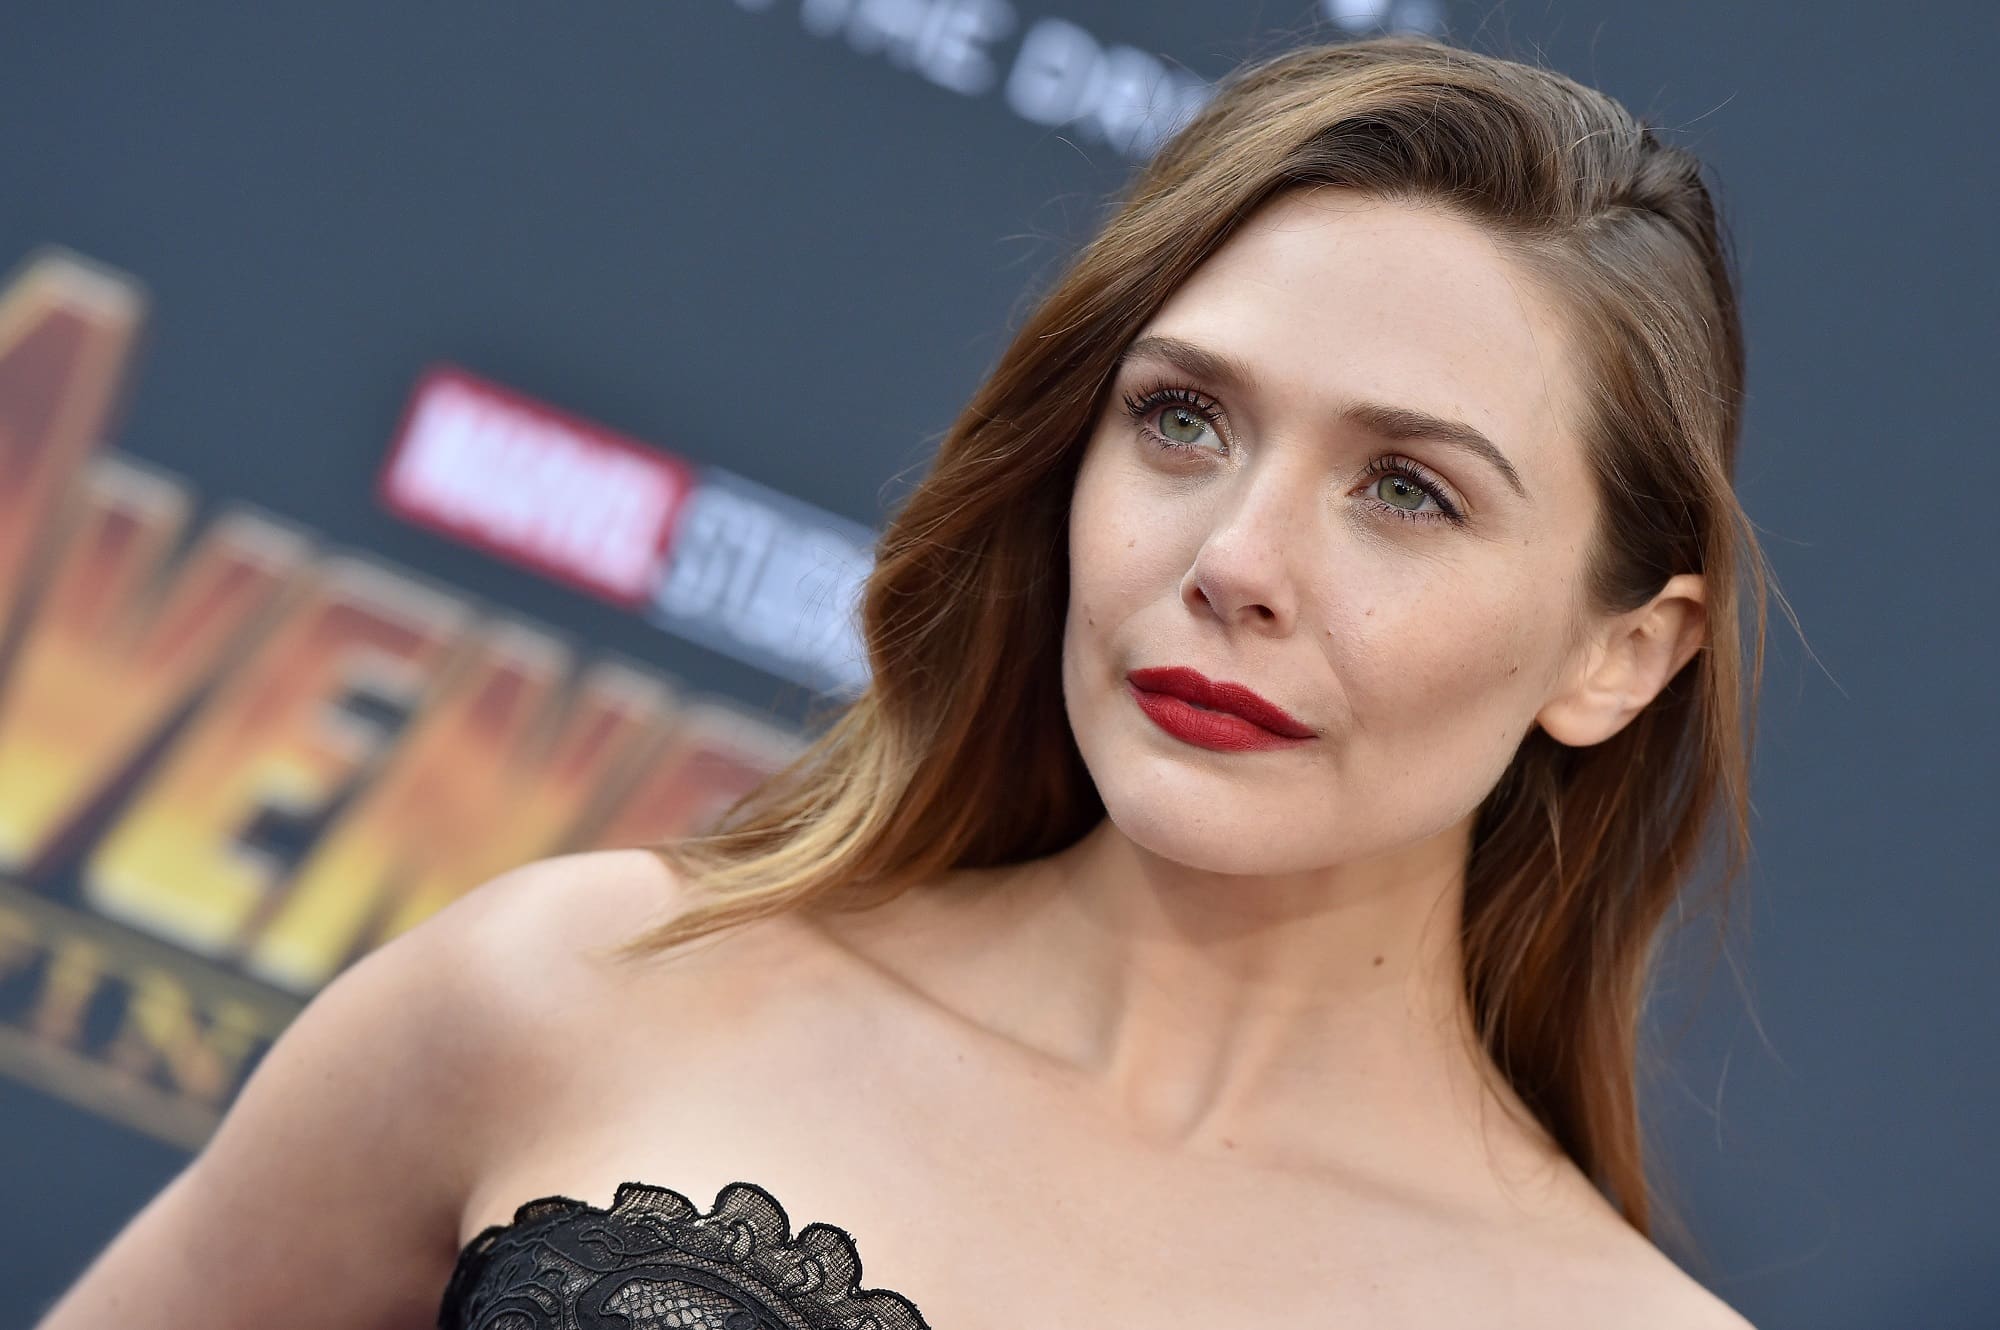 elizabeth-olsen-discusses-whether-we-should-expect-a-scarlet-witch-solo-movie-going-forward-in-the-mcu